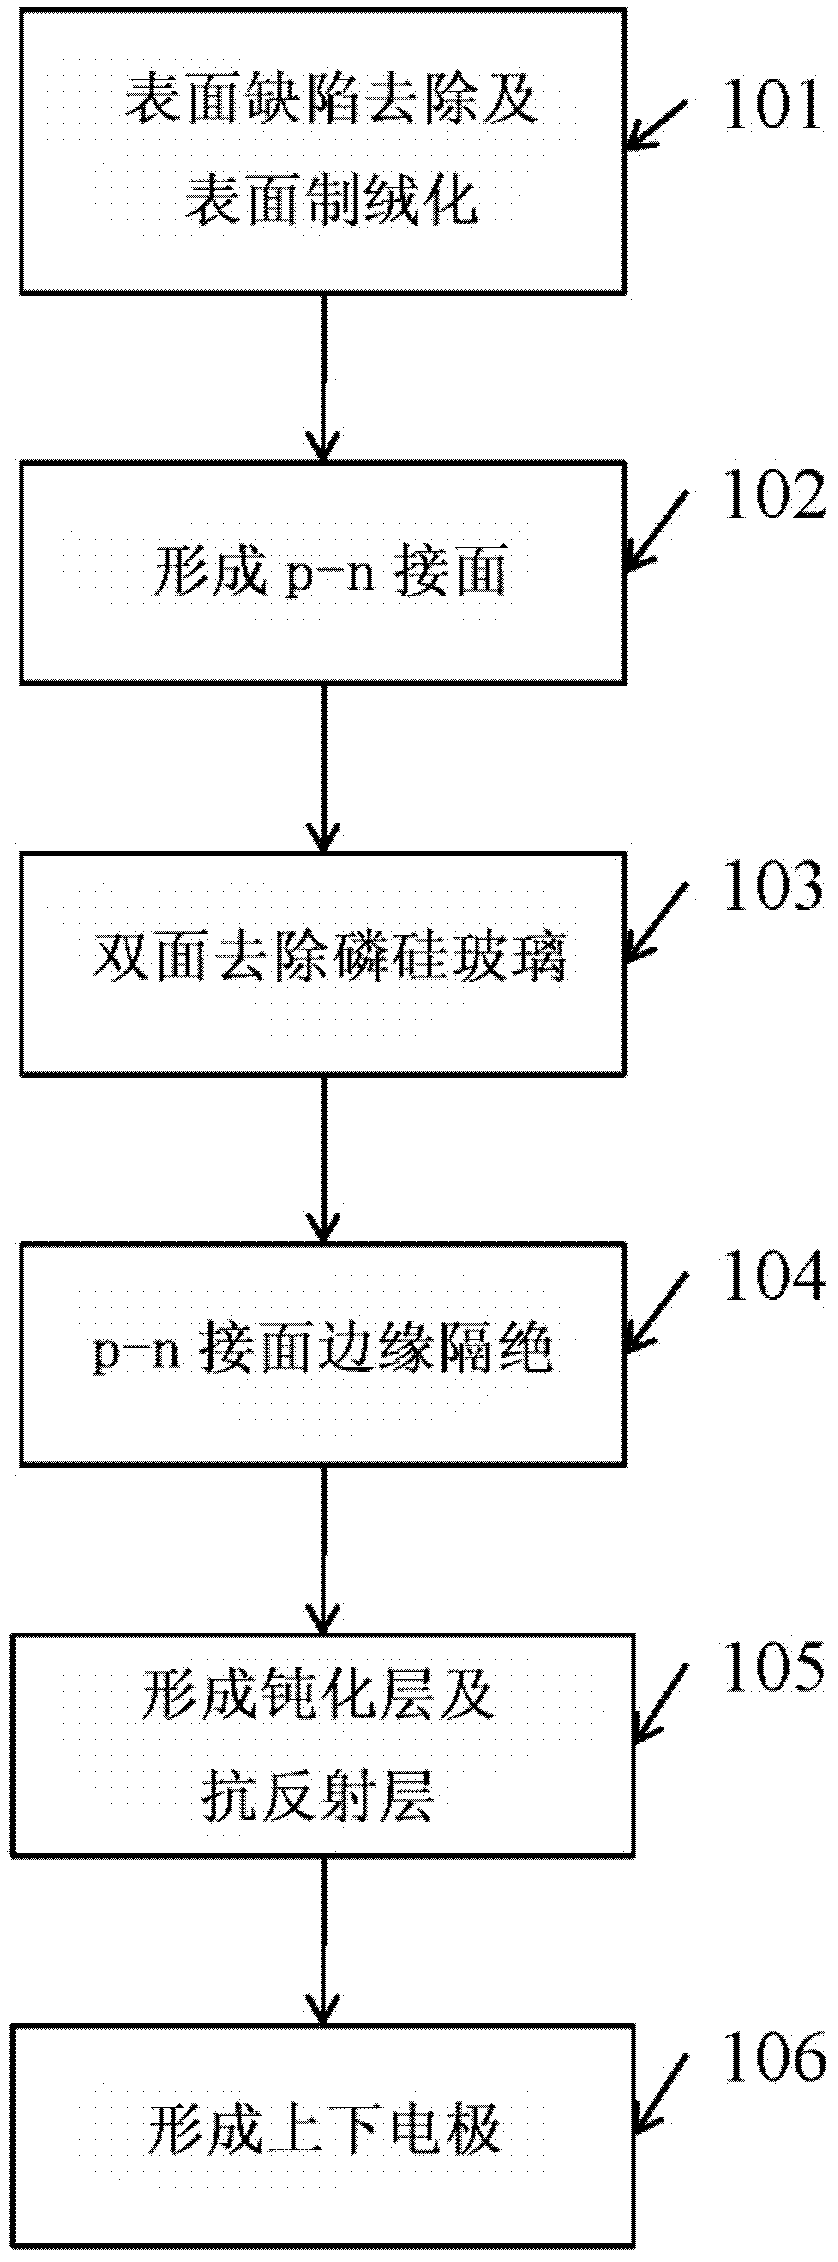 Method for fabricating silicon wafer solar cell